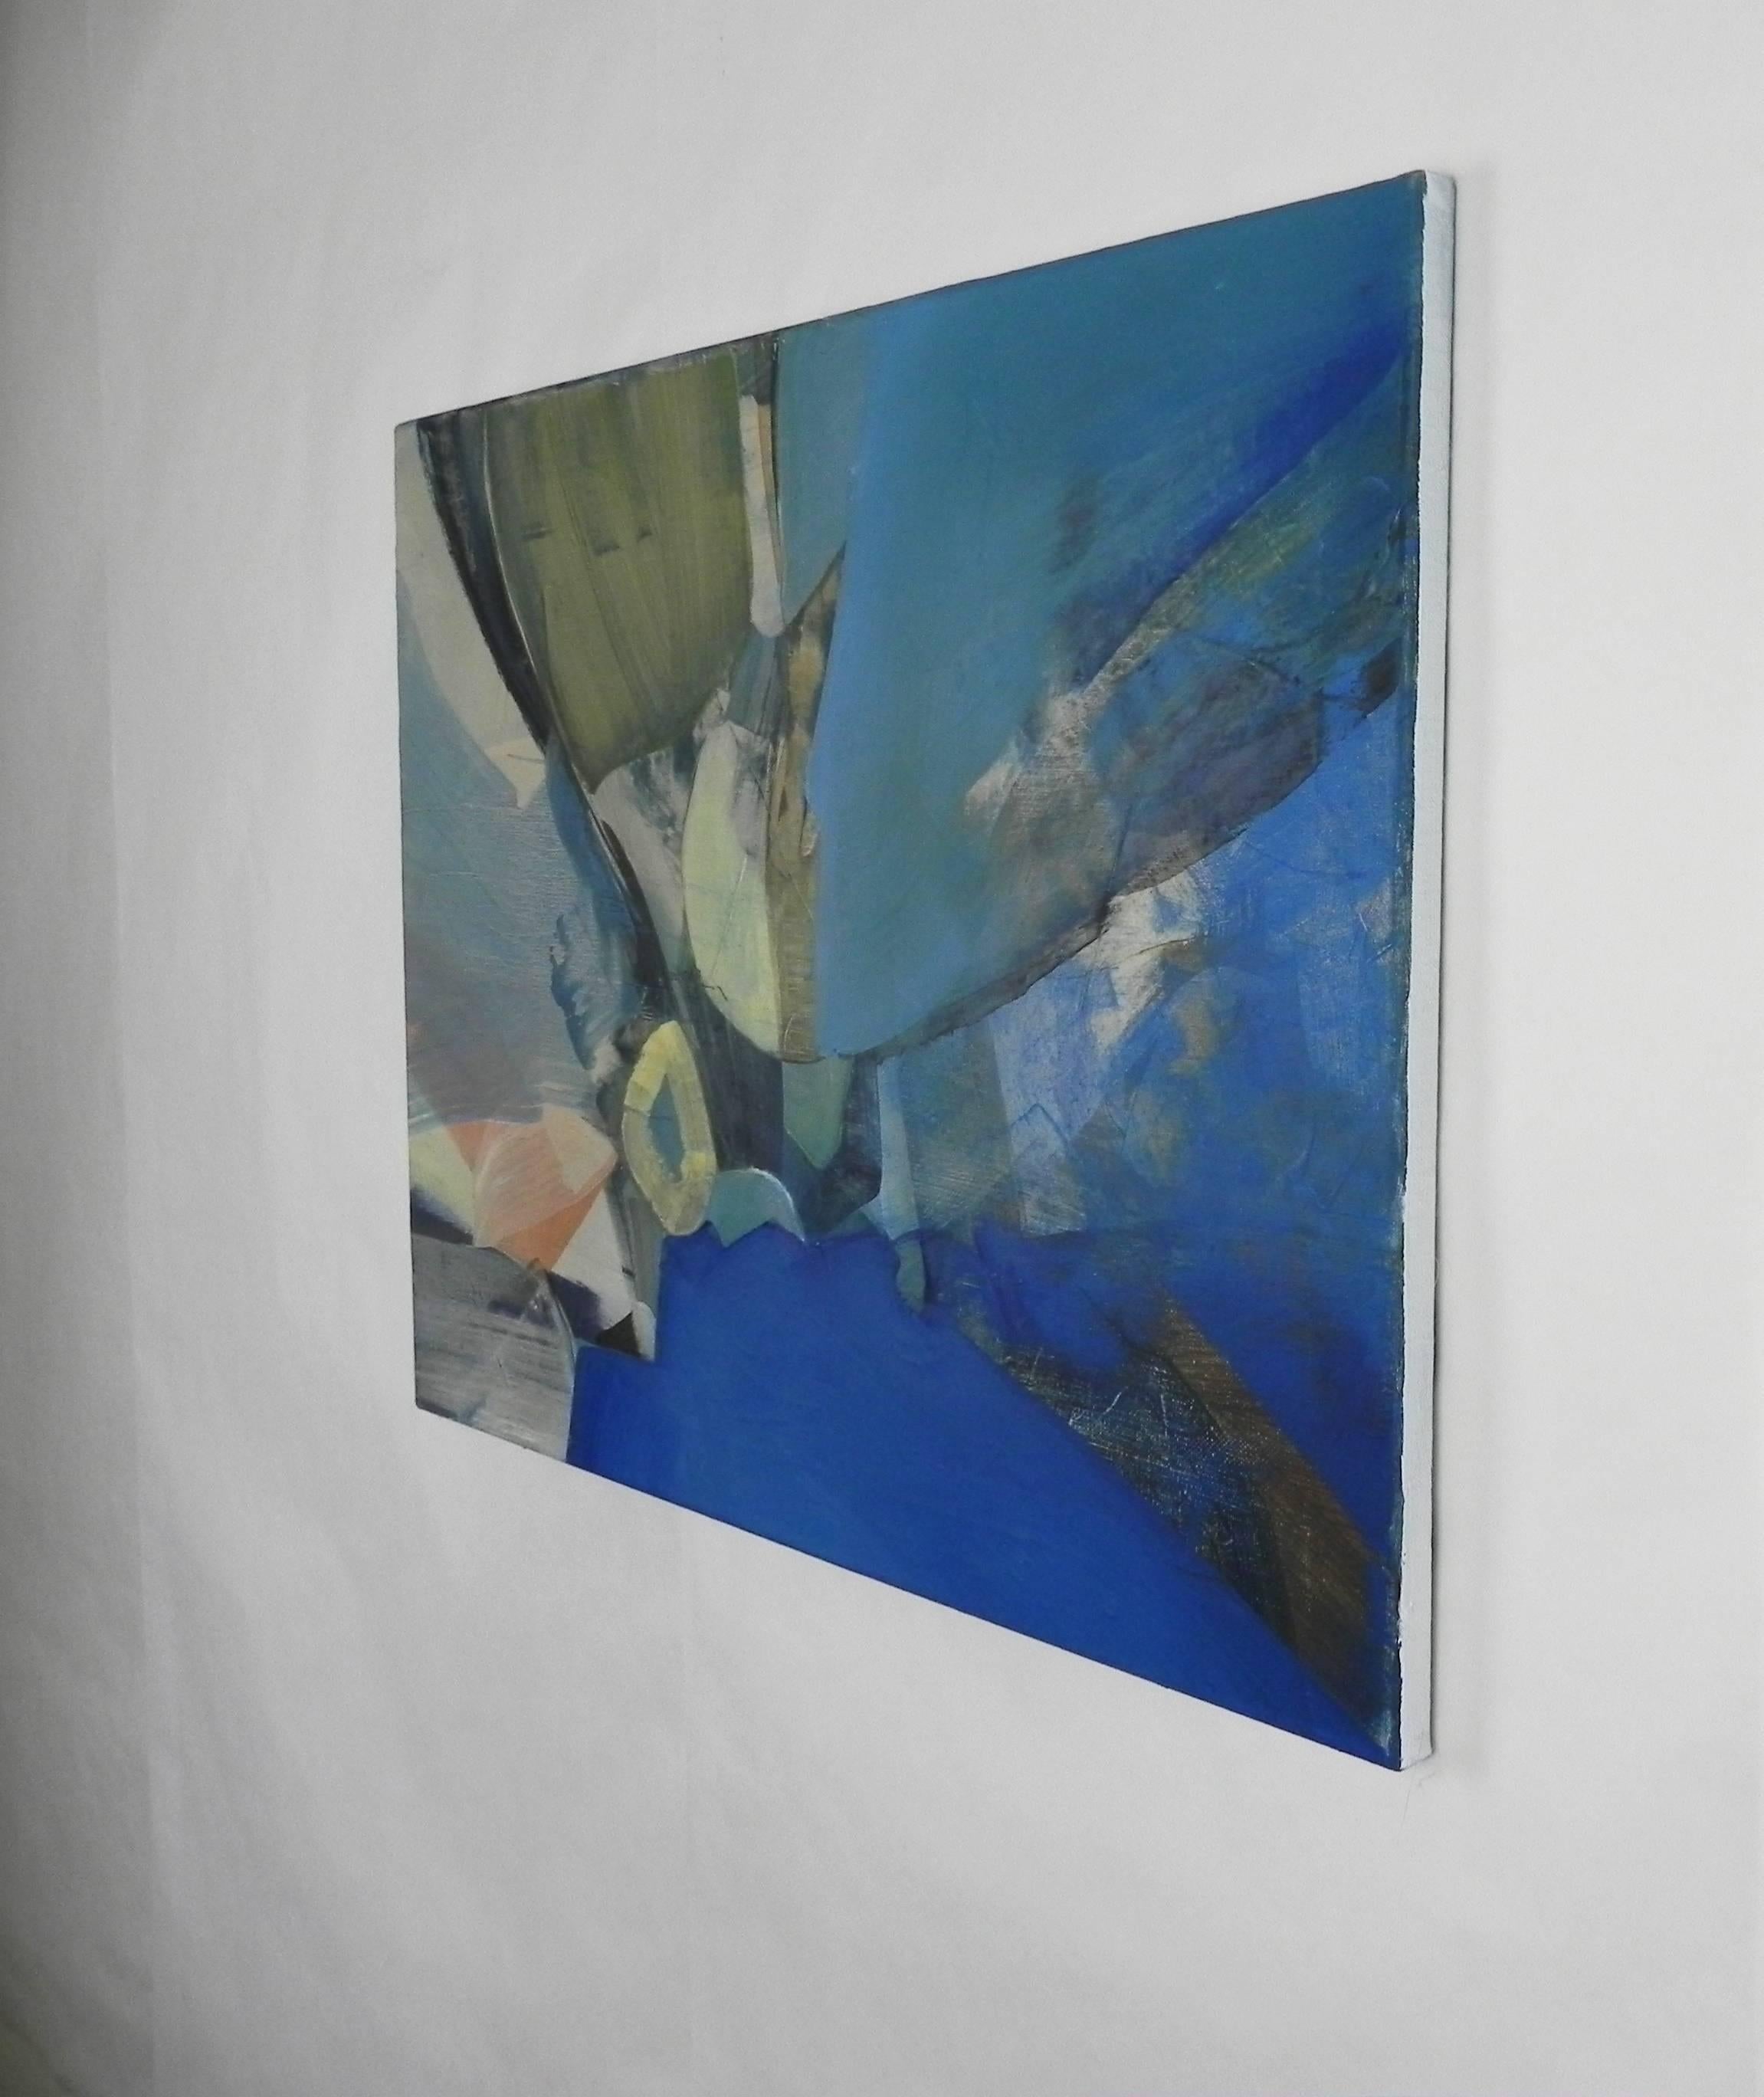 An original cool-toned, abstract horizontal seascape/ landscape, oil on canvas, by artist Kale Baker titled Beneath the Blue, 2017. Be drawn in. Reflective in mood. Alluring composition with a loose and layered vibrant palette of bright blues on top